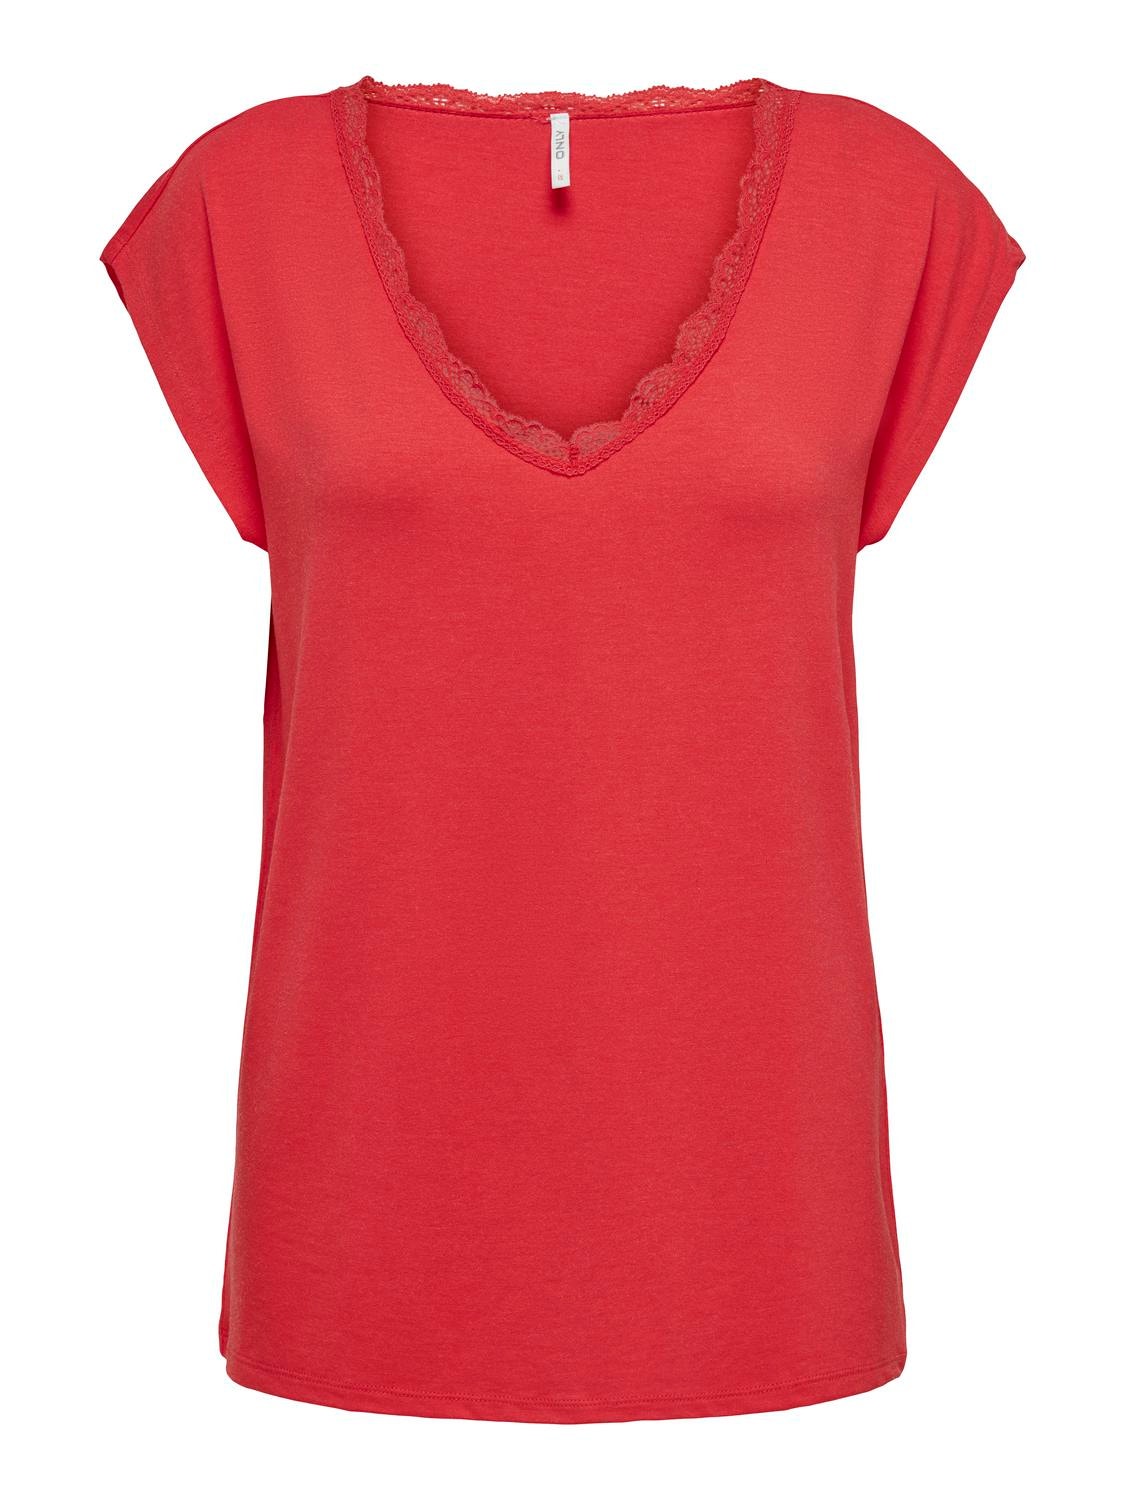 ONLY Top with lace edge -Cayenne - 15271263